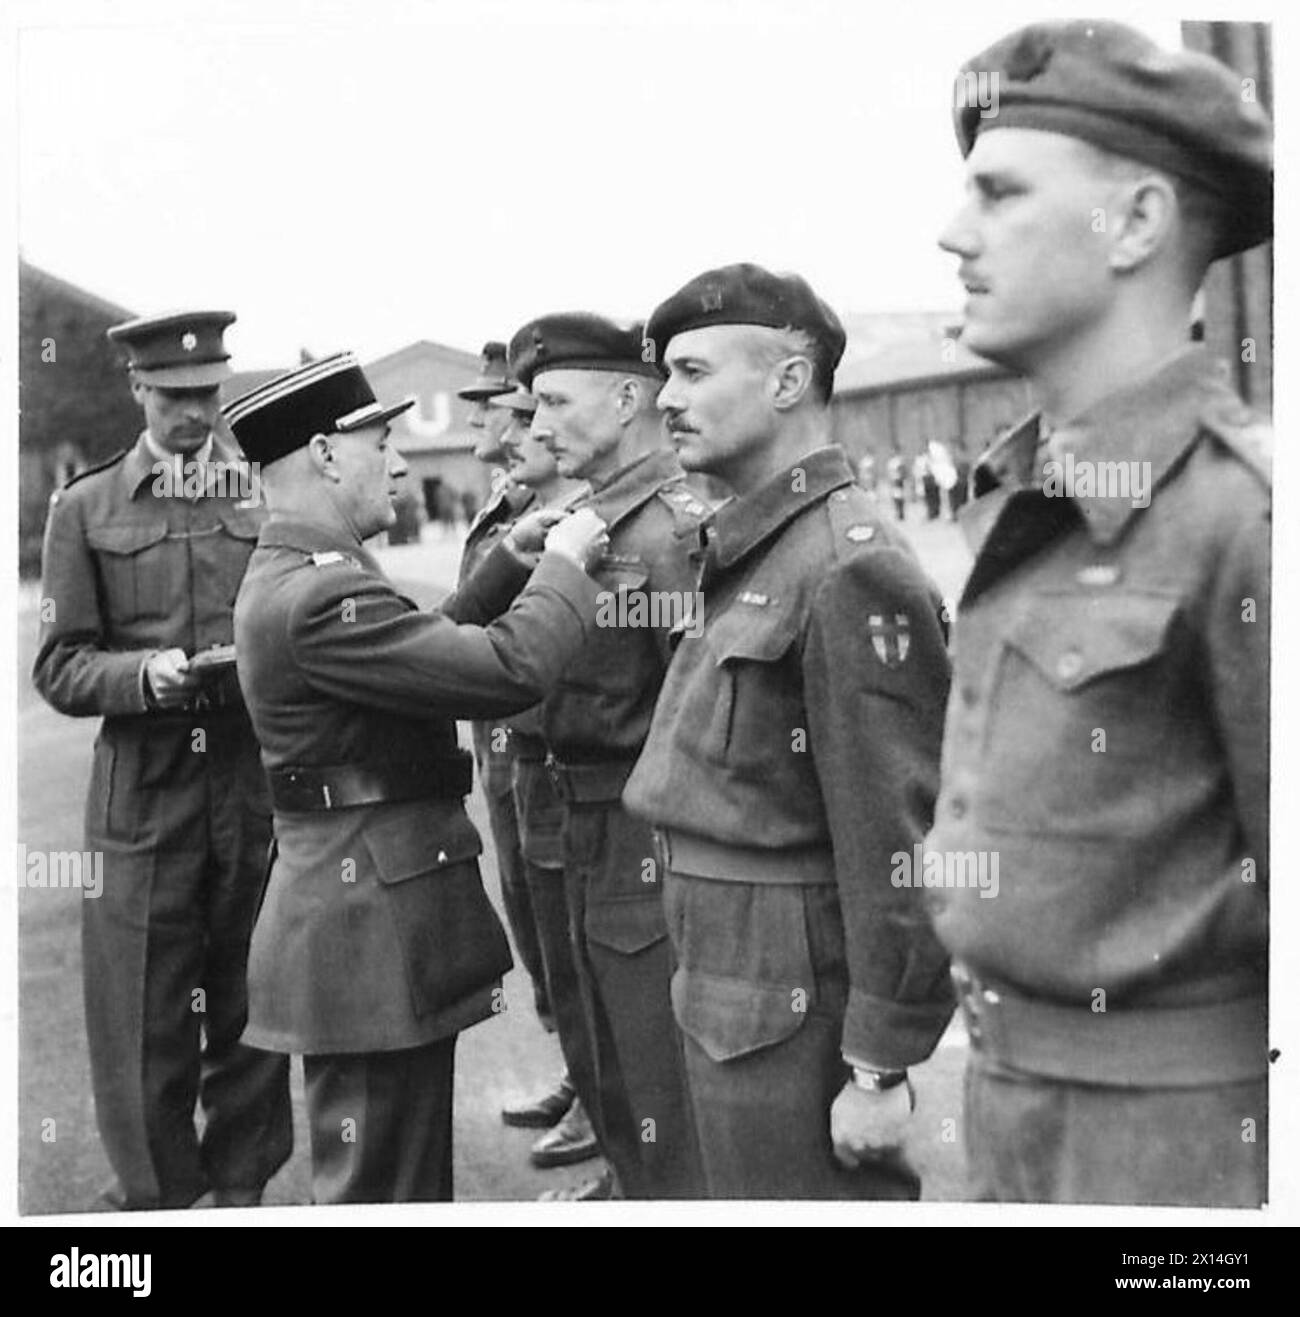 PRESENTATION OF CROIX PE GUERRE [613 REGT. R.A. , 37 R.H.U.] - 8144 Lieutenant Colonel R.W. McLeod of the 46th Rft H.U.receives the Croix de Guerre from Colonel H. Troullier British Army, 21st Army Group Stock Photo